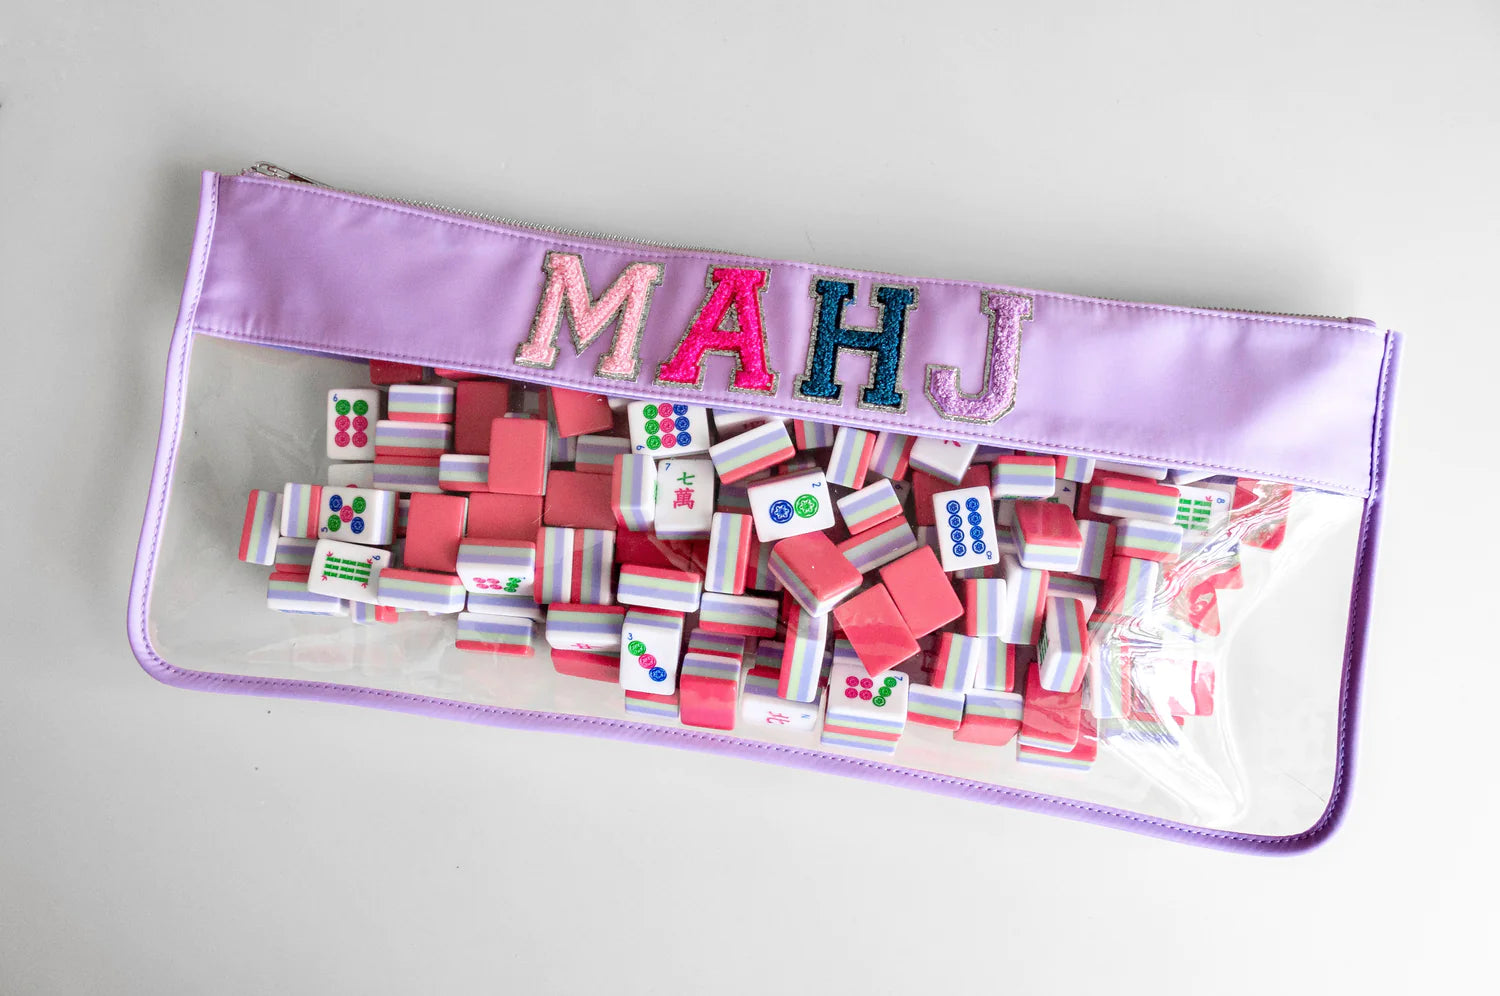 purple and clear zippered bag  with the letters MAHJ in light pink, hot pink,  blue and purple filled with mahjong tiles.